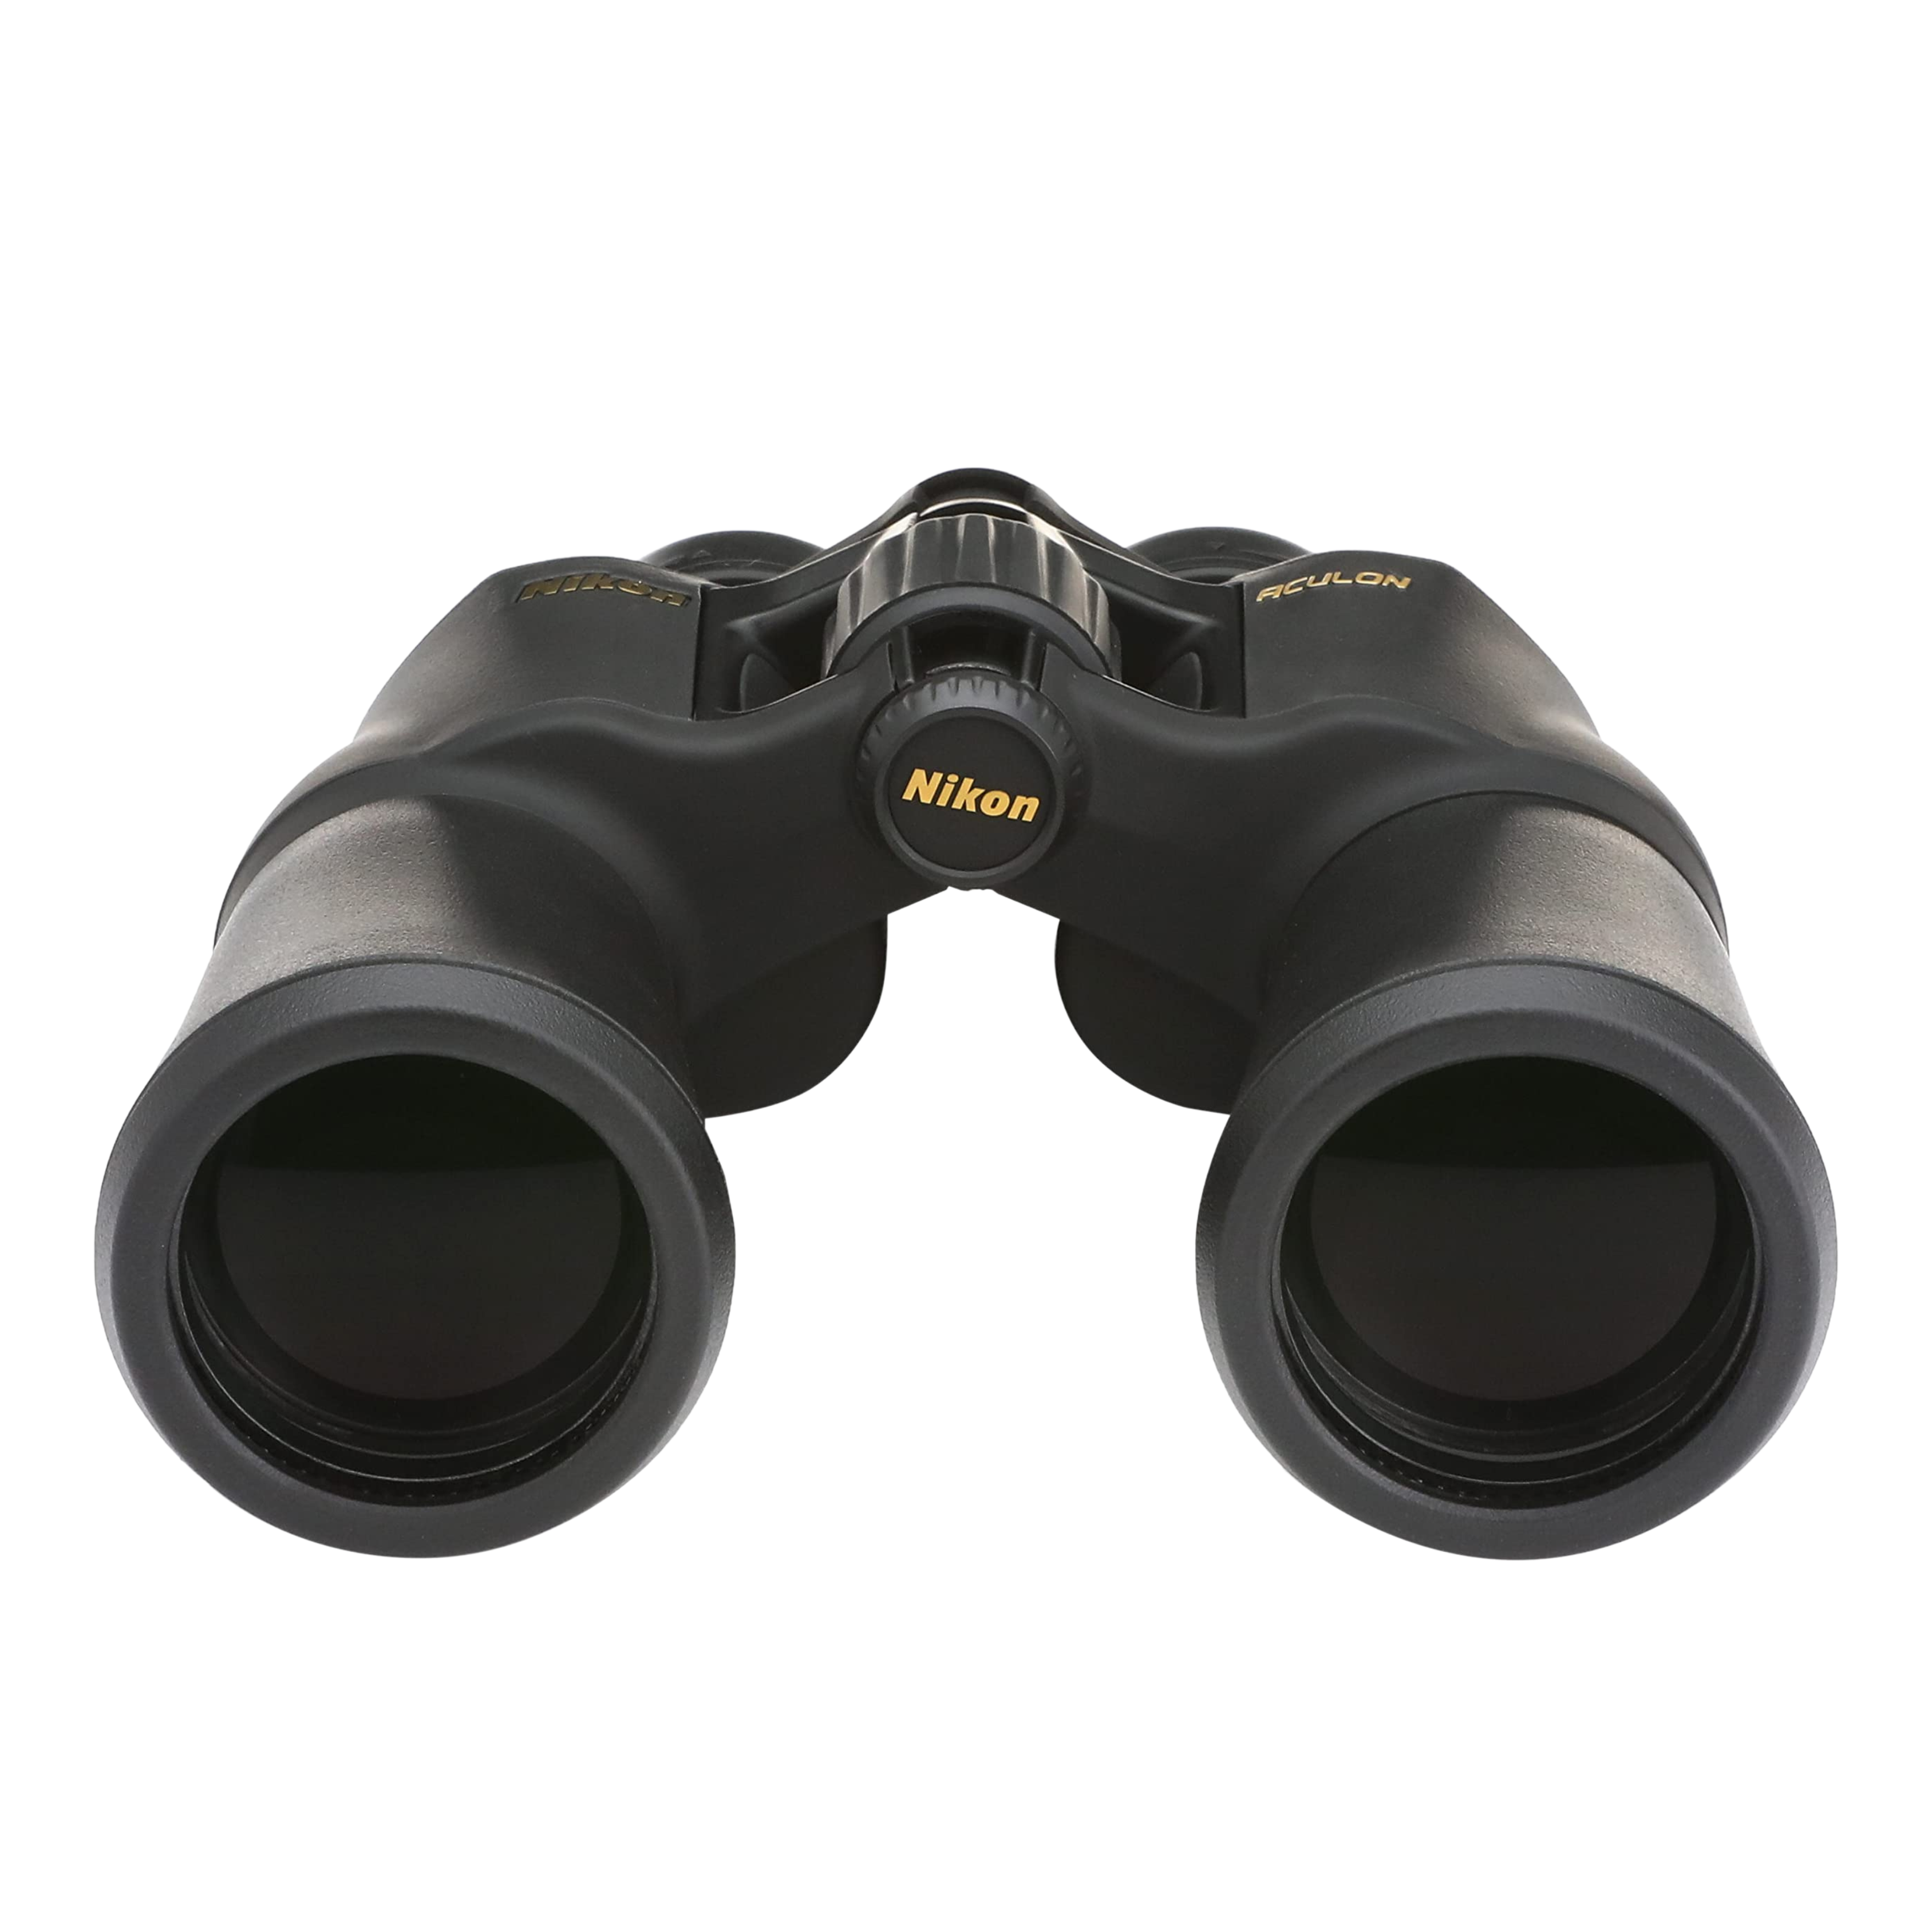 These are product images of Nikon Binocular A211 16x50 by SharePal.